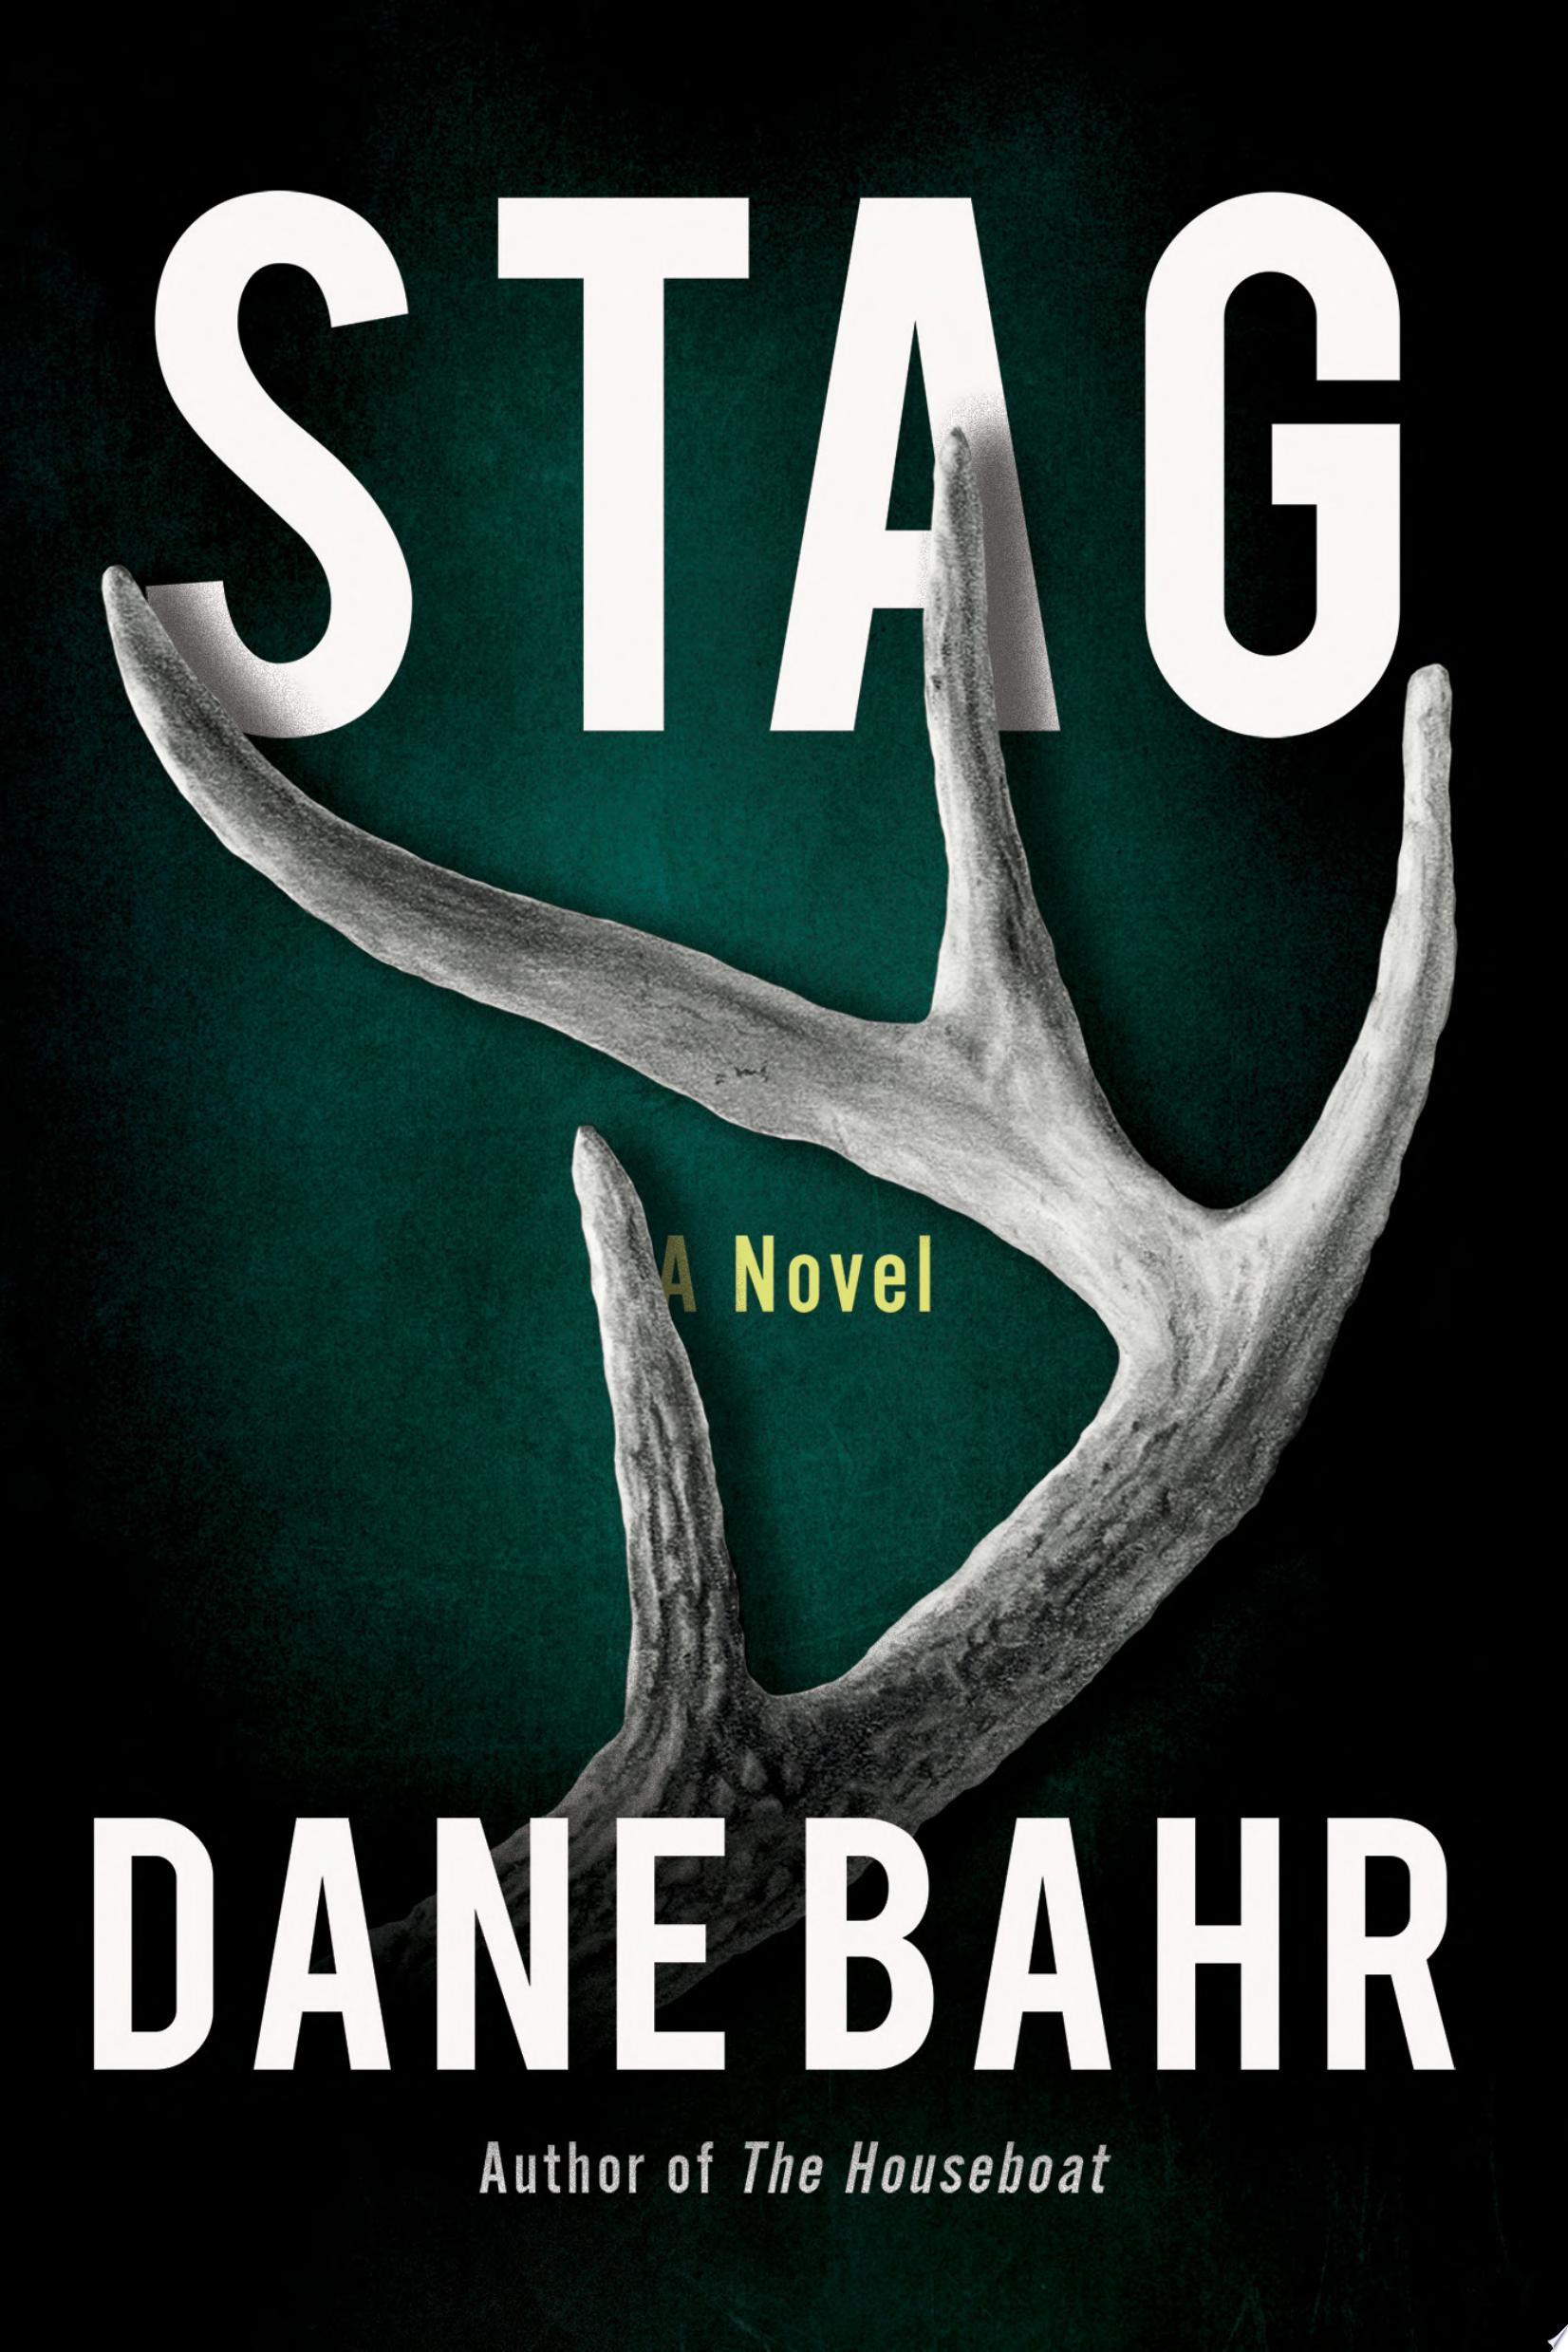 Image for "Stag"